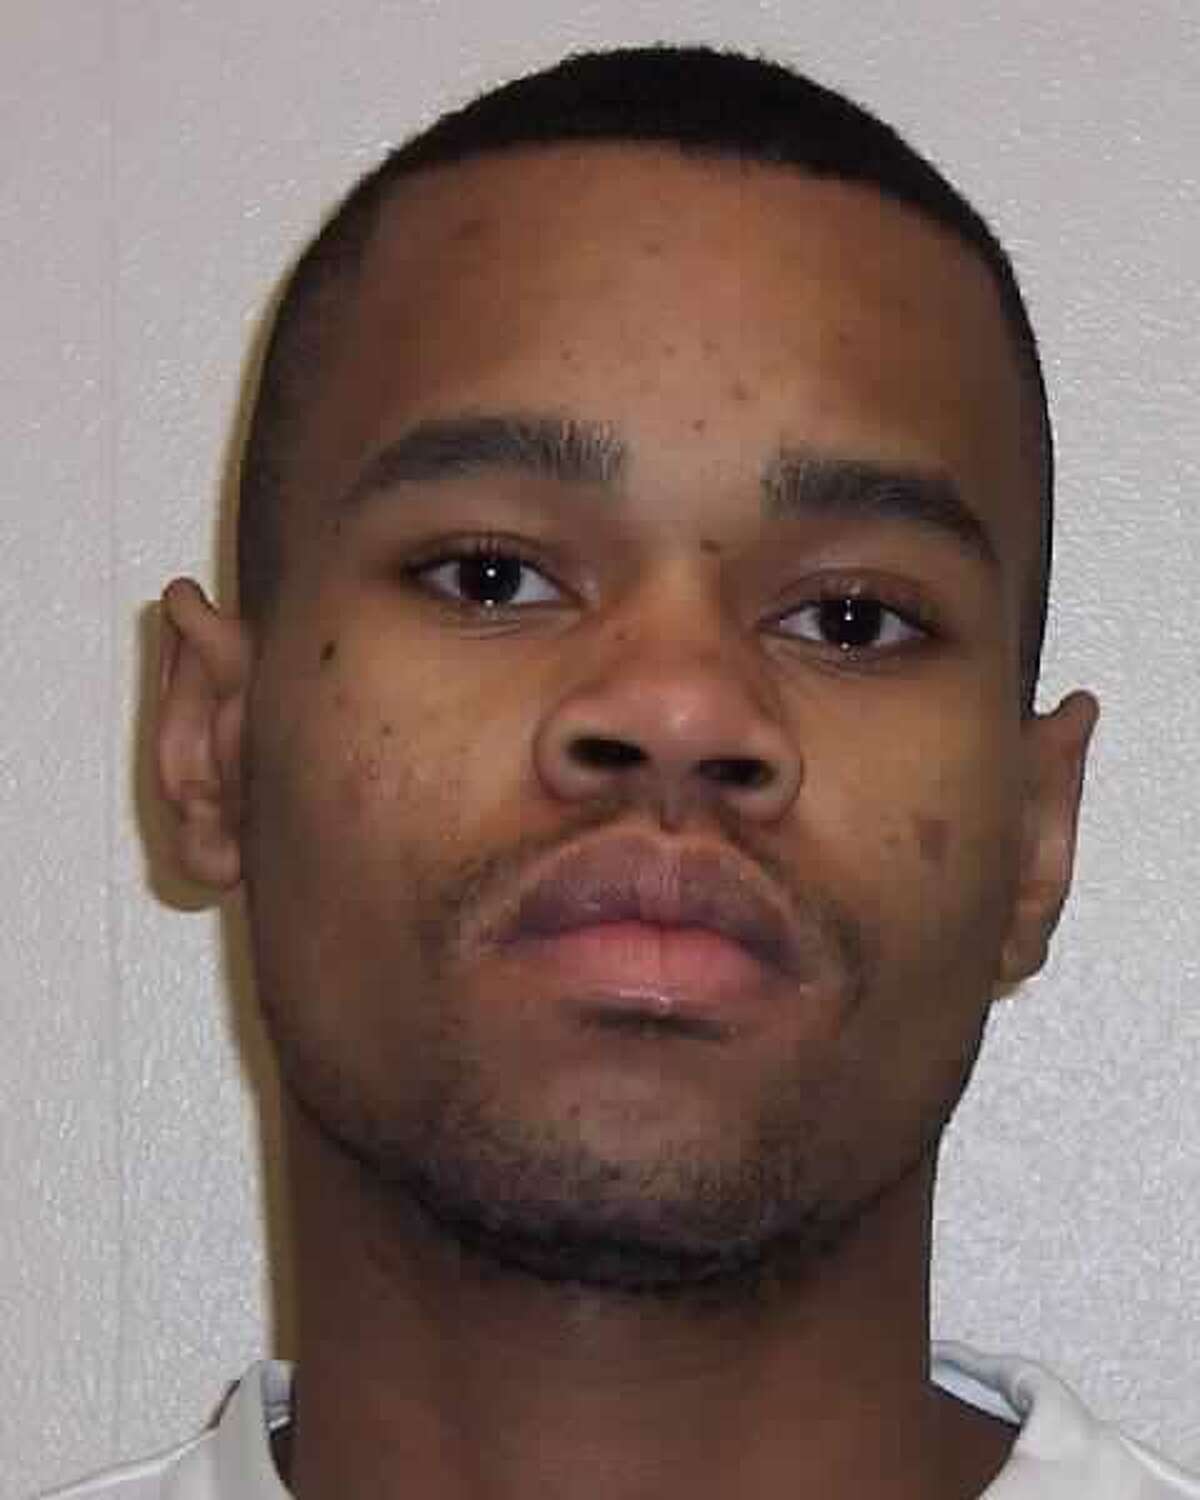 Kenneth W. Harding, 19 (Department of Corrections photo)